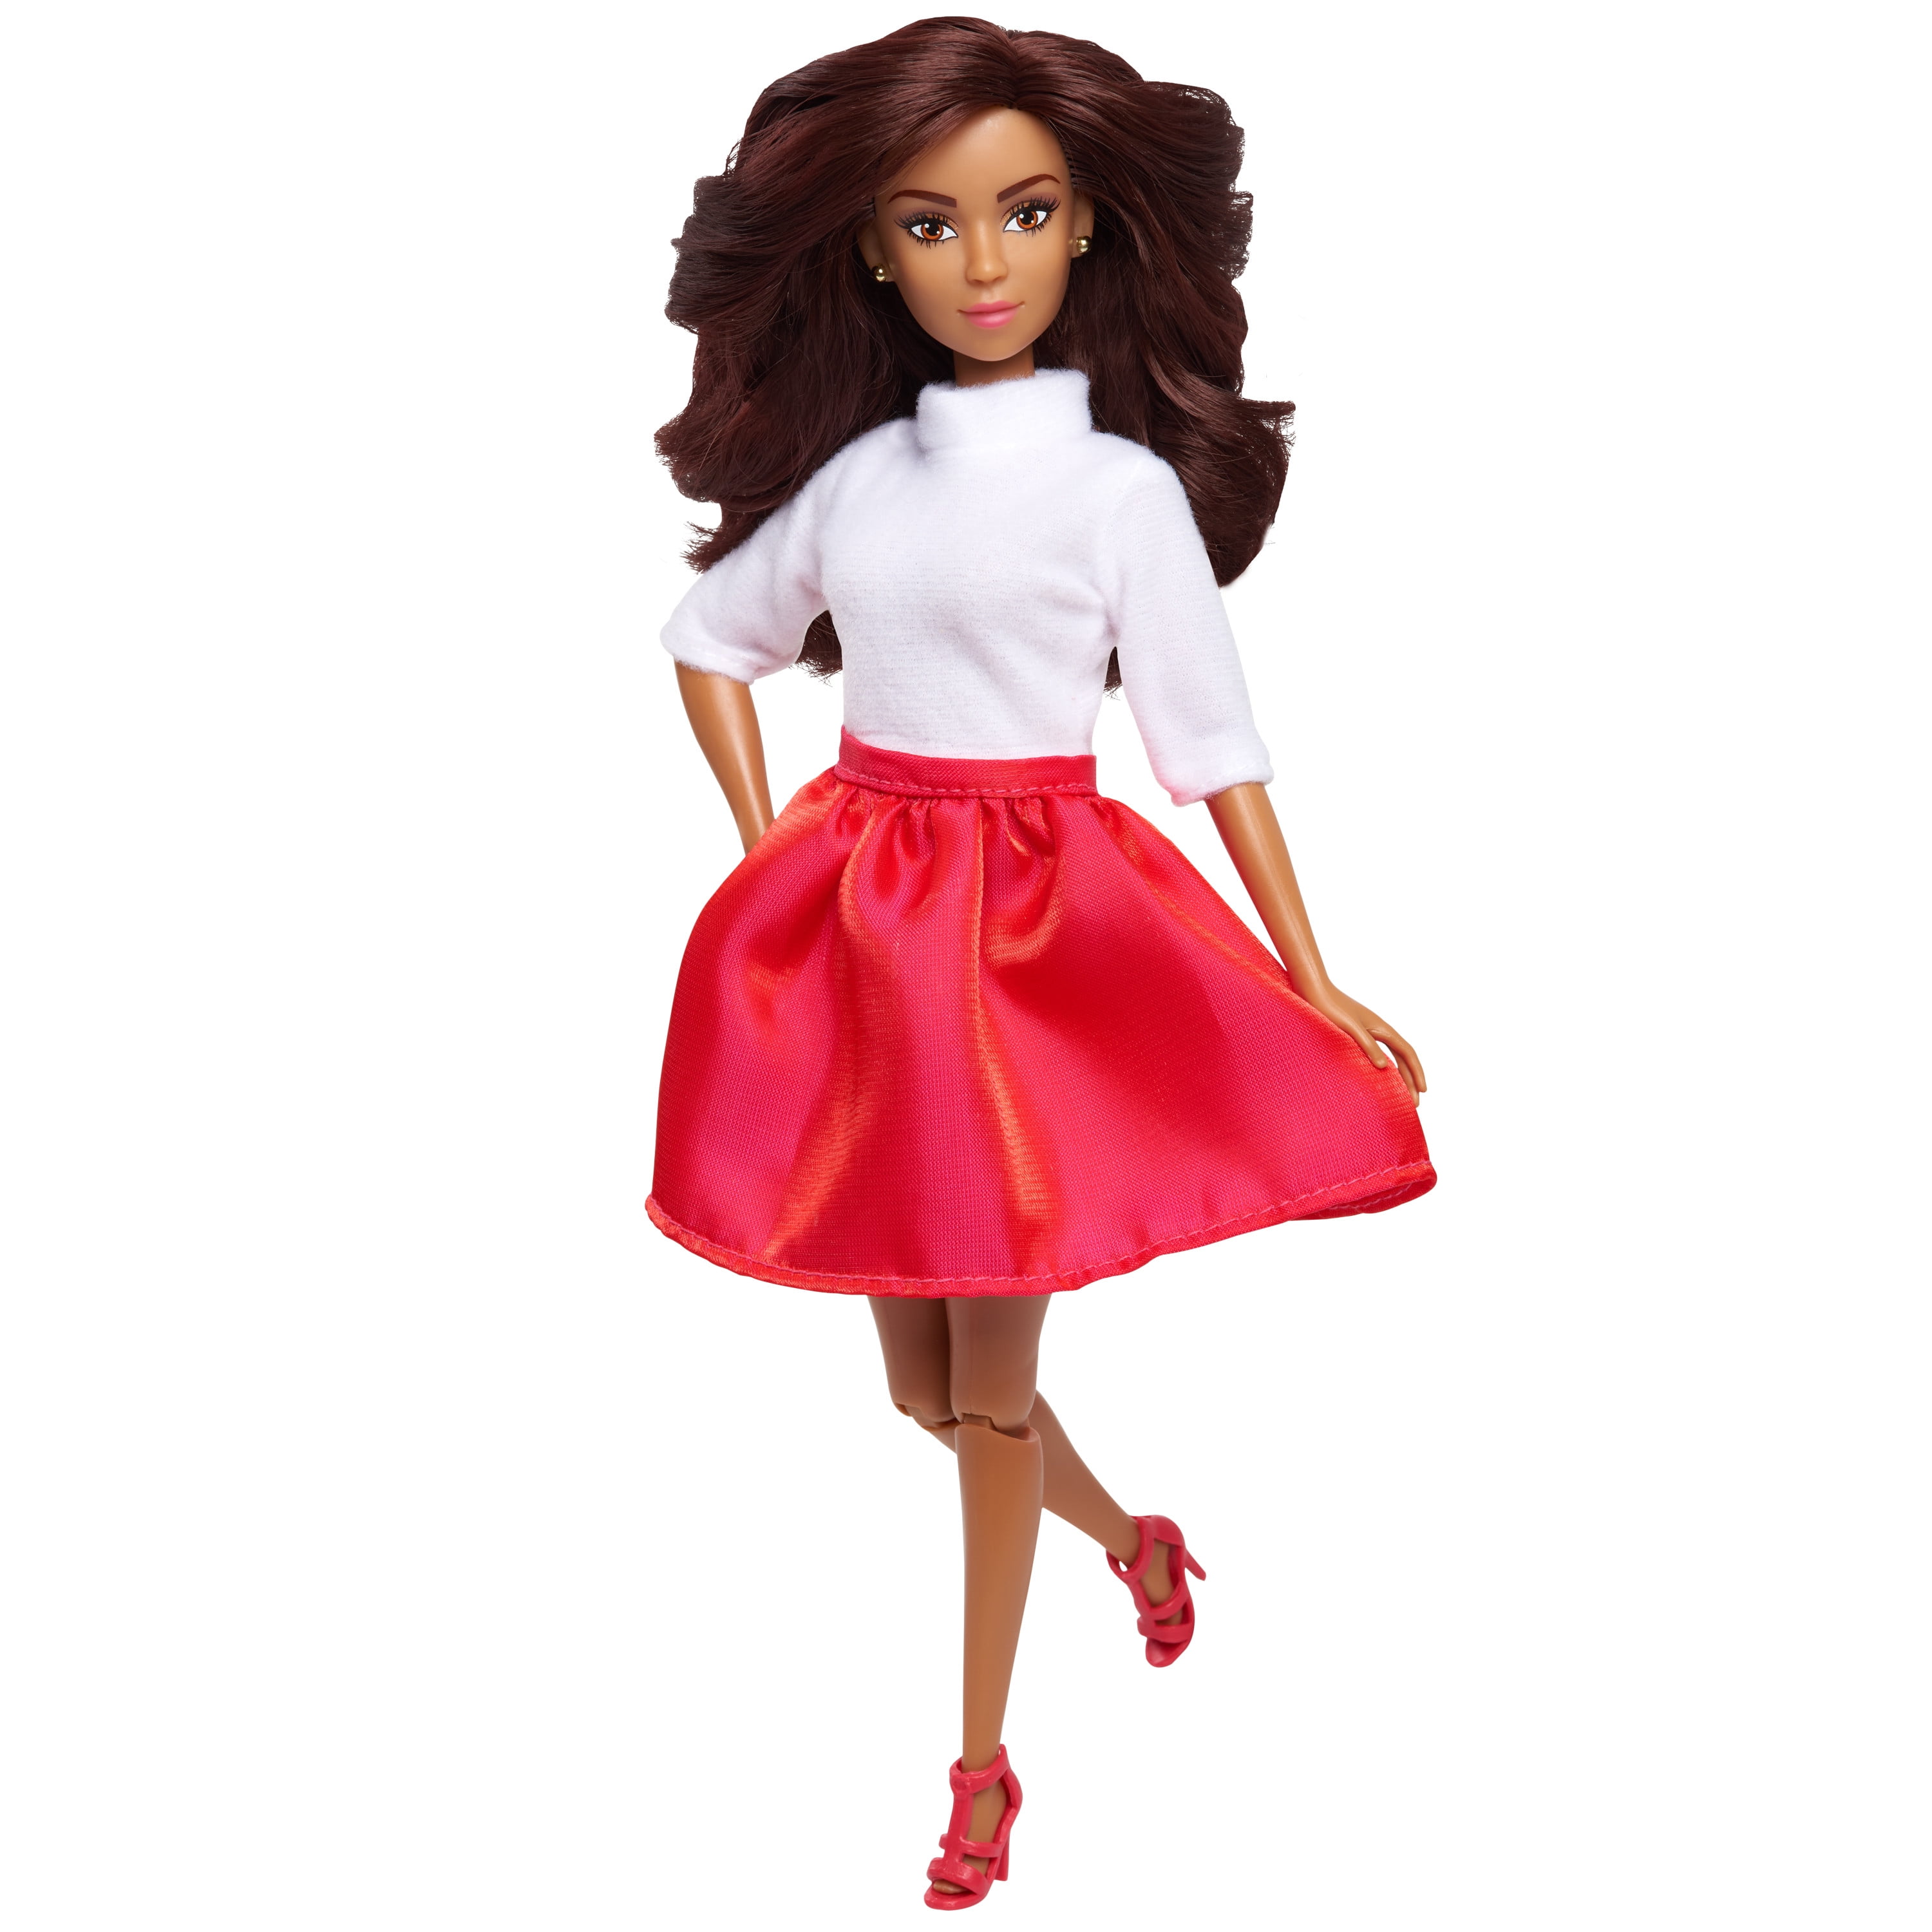 The Fresh Dolls Fresh Dolls Lexi Fashion Doll, 11.5-inches tall, white shirt and red skirt, brown hair,  Kids Toys for Ages 3 Up, Gifts and Presents